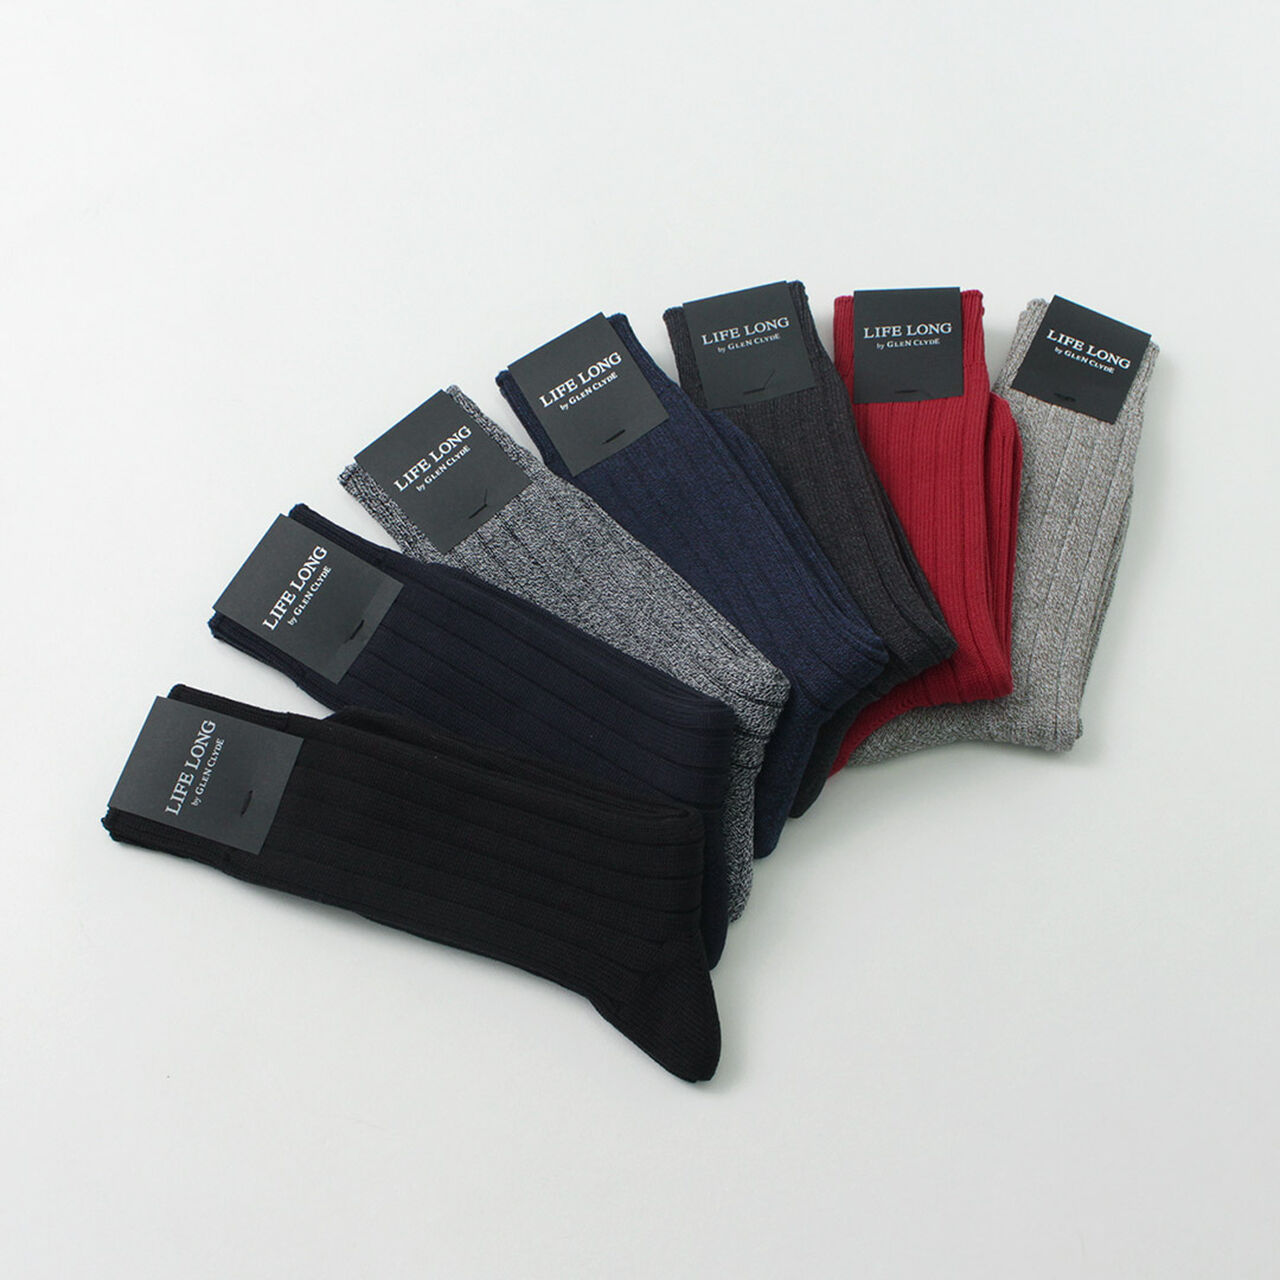 TS-1 Cotton and Cordura ribbed socks,, large image number 5